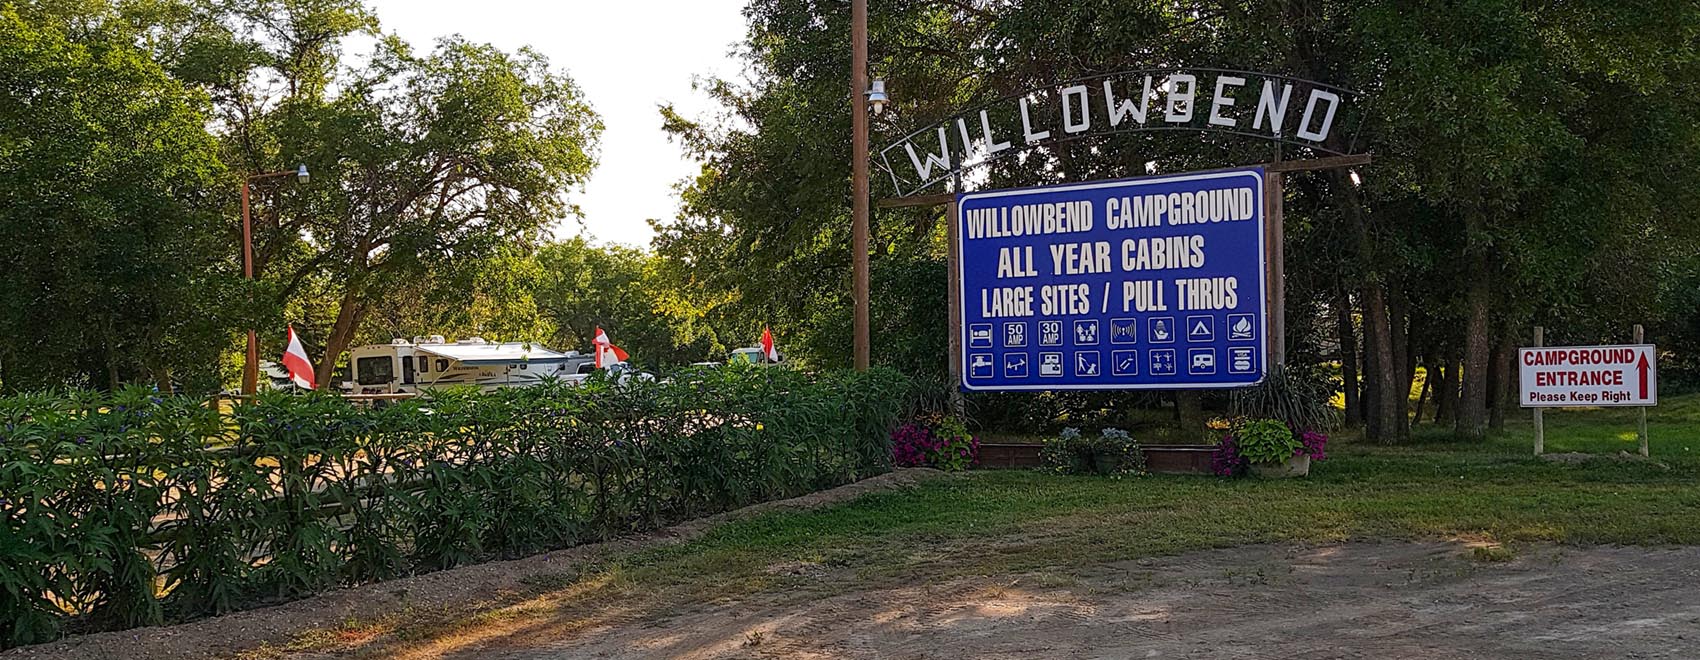 Willowbend Campground and Cabins